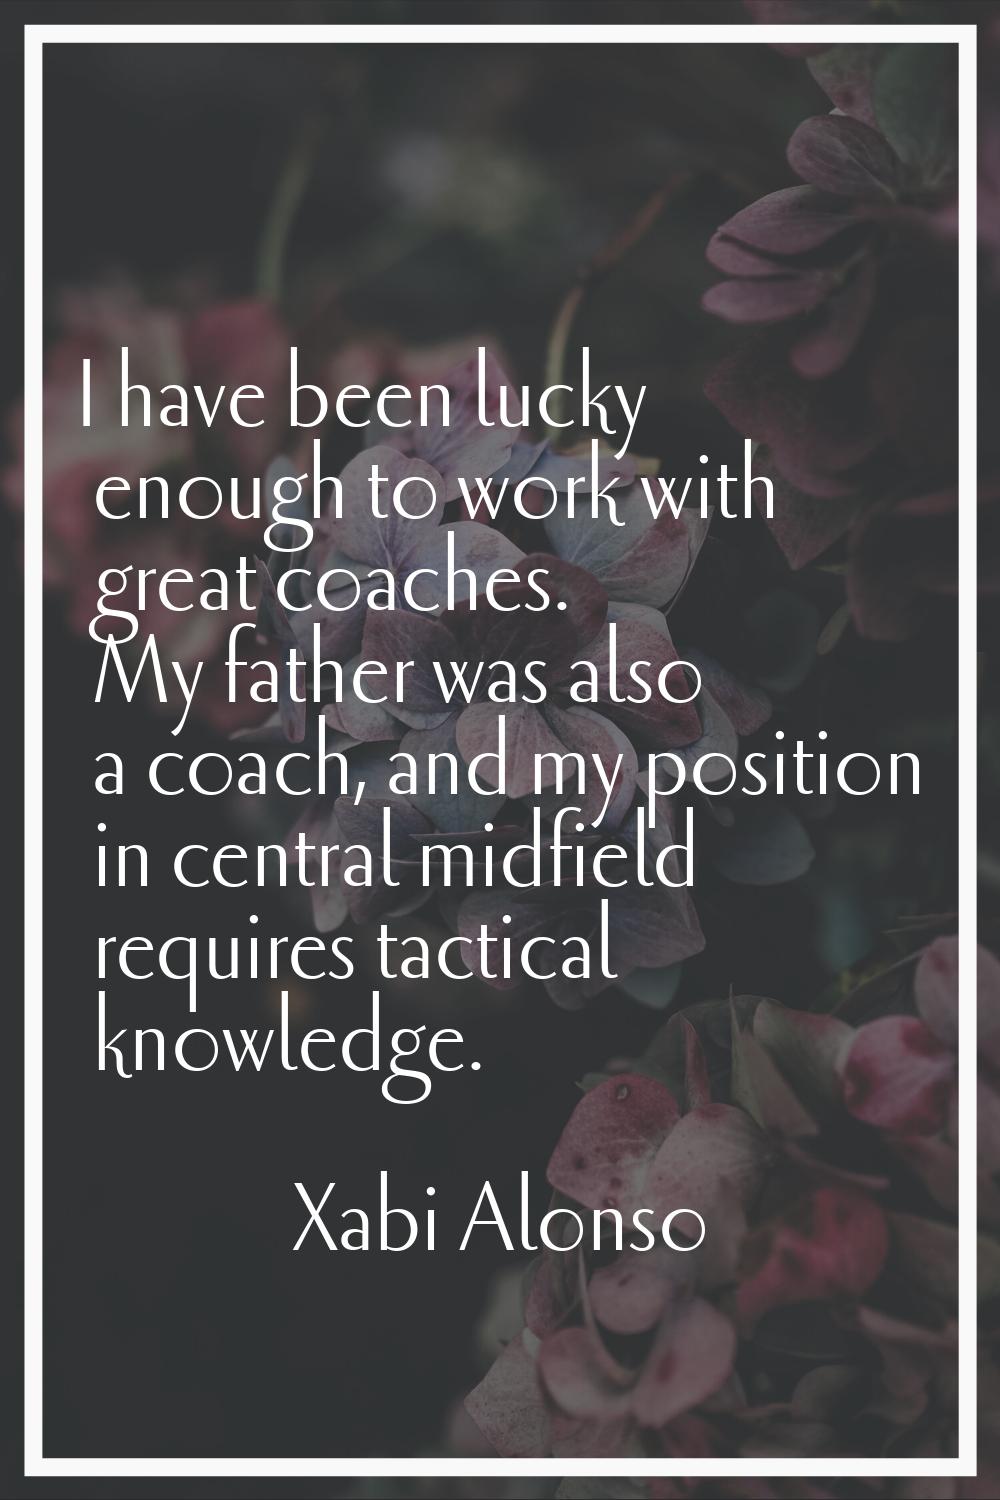 I have been lucky enough to work with great coaches. My father was also a coach, and my position in